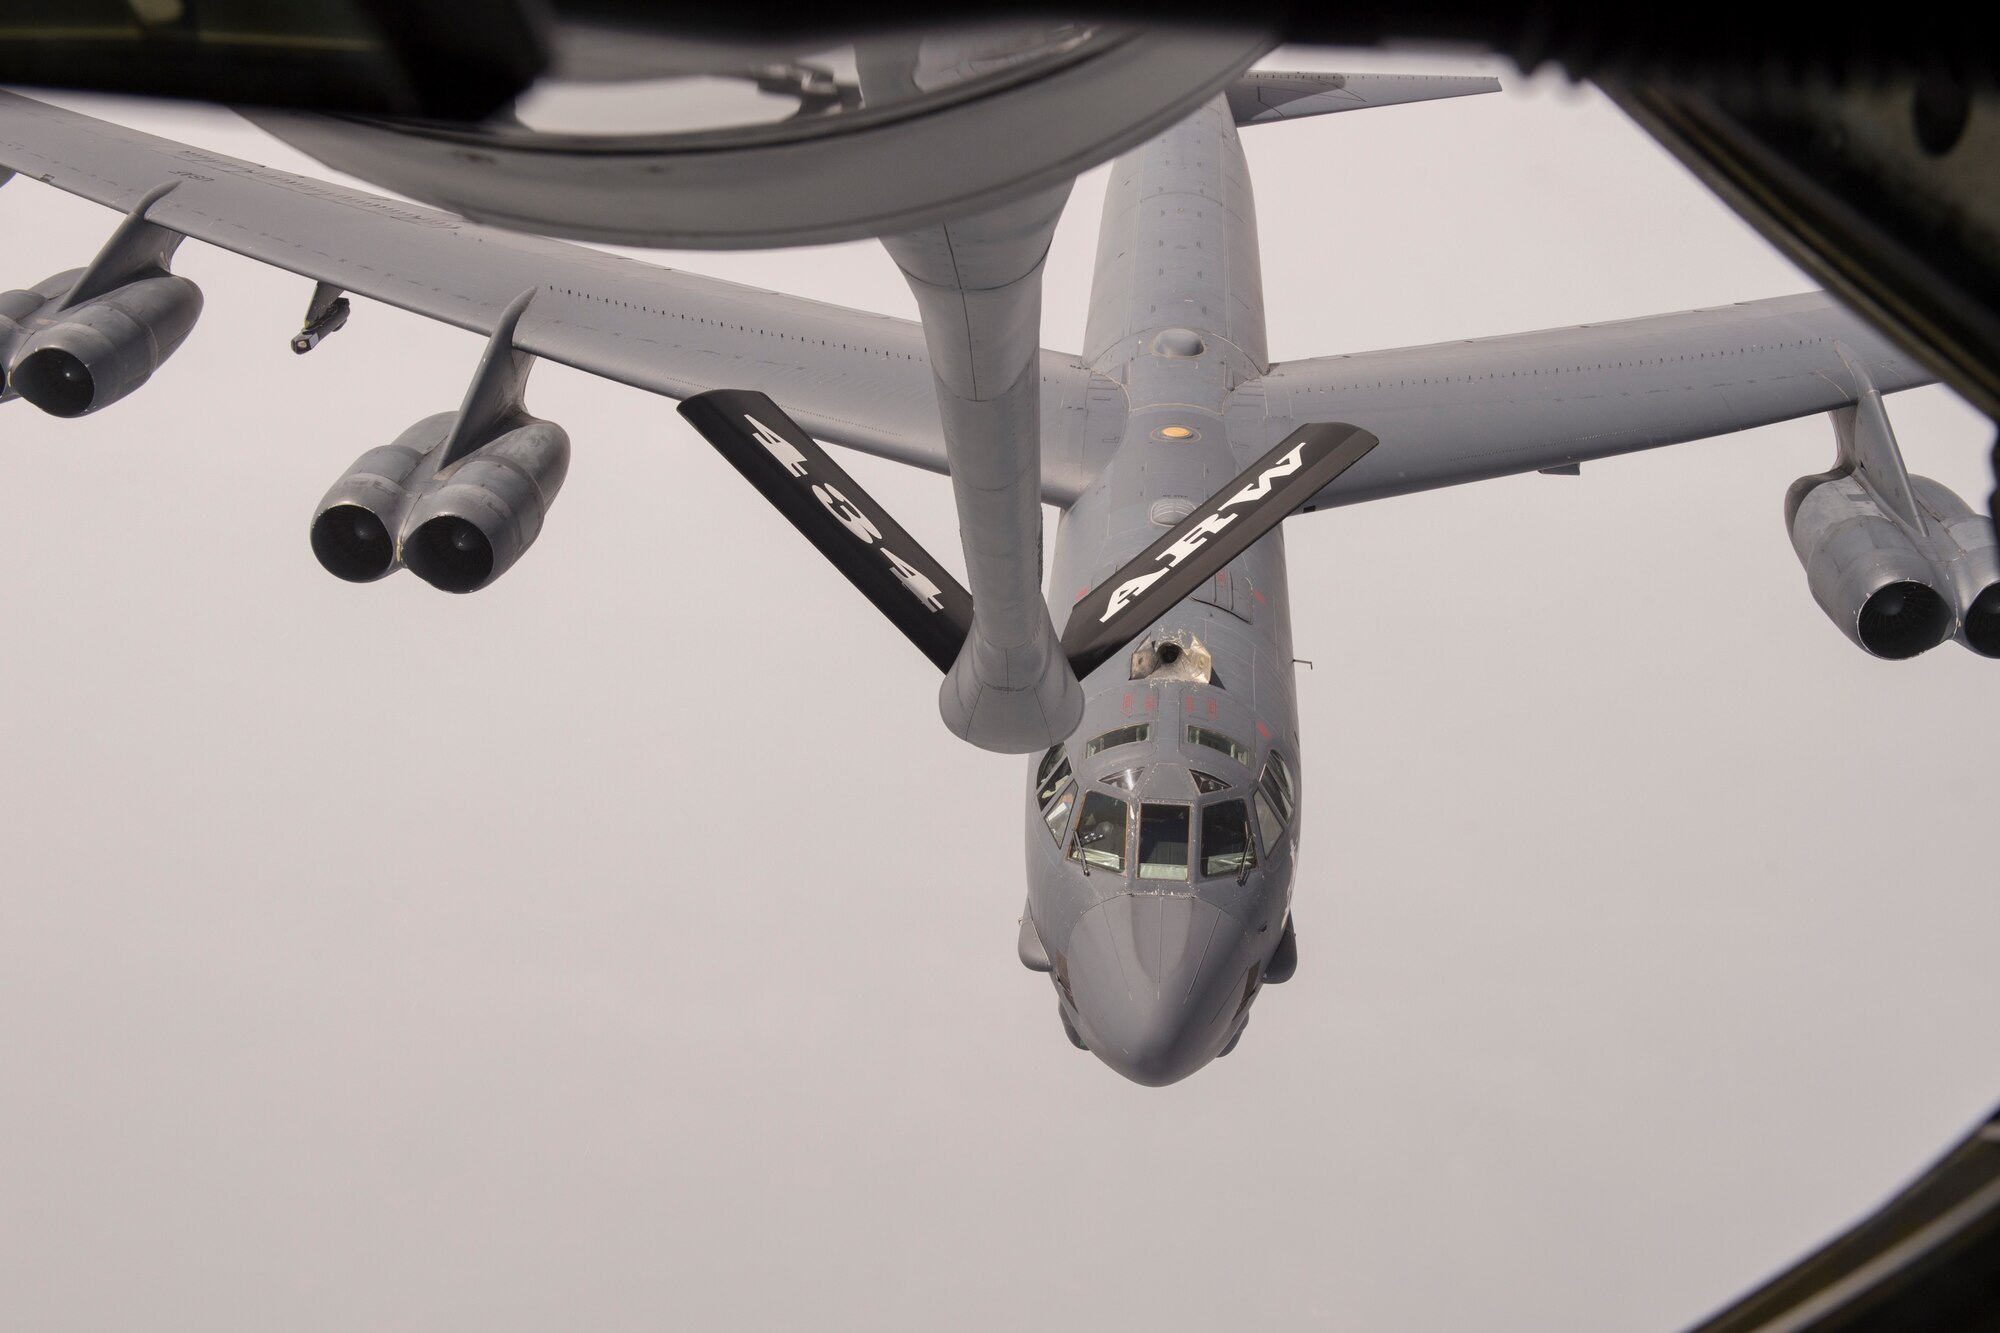 A U.S. Air Force B-52 Stratofortress from the 5th Bomb Wing, Minot Air Force Base, N.D., prepares to be refueled by a 434th Air Refueling Wing KC-135R Stratotanker during a refueling mission over the Midwest Aug. 24, 2018. Indiana's two flying wings partnered with Employee Support of the Guard and Reserve to fly 60 employers of guardsmen and reservists on a boss lift aimed at educating them about their employees' military service and responsibilities. (U.S. Air Force Photo/Staff Sgt. Christopher Massey)